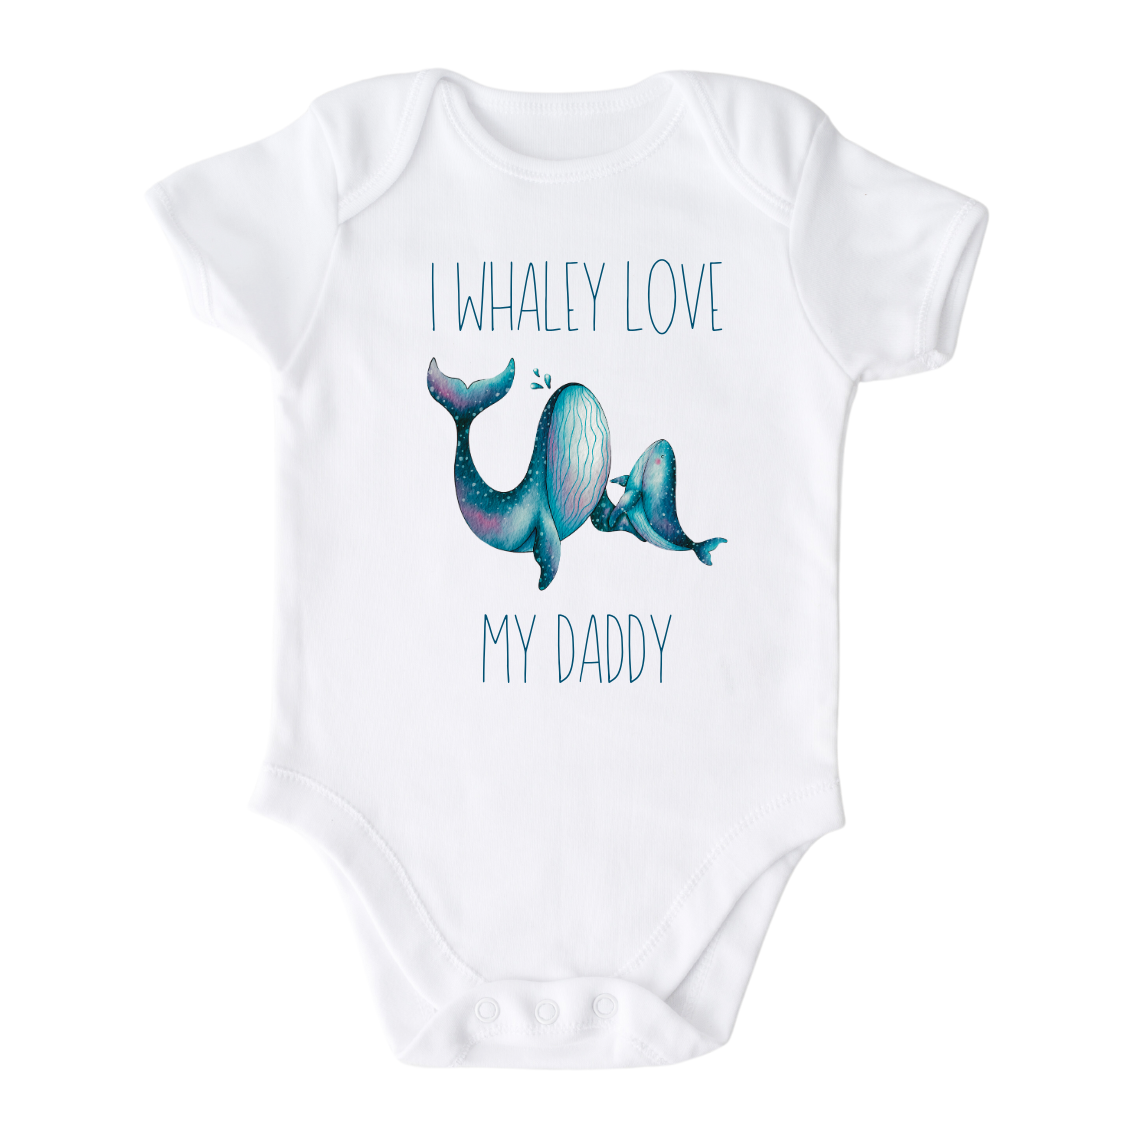 Baby Onesie with a cute printed design of a Parent and Kid Whale, customizable with the text 'I Whaley Love My Dad'